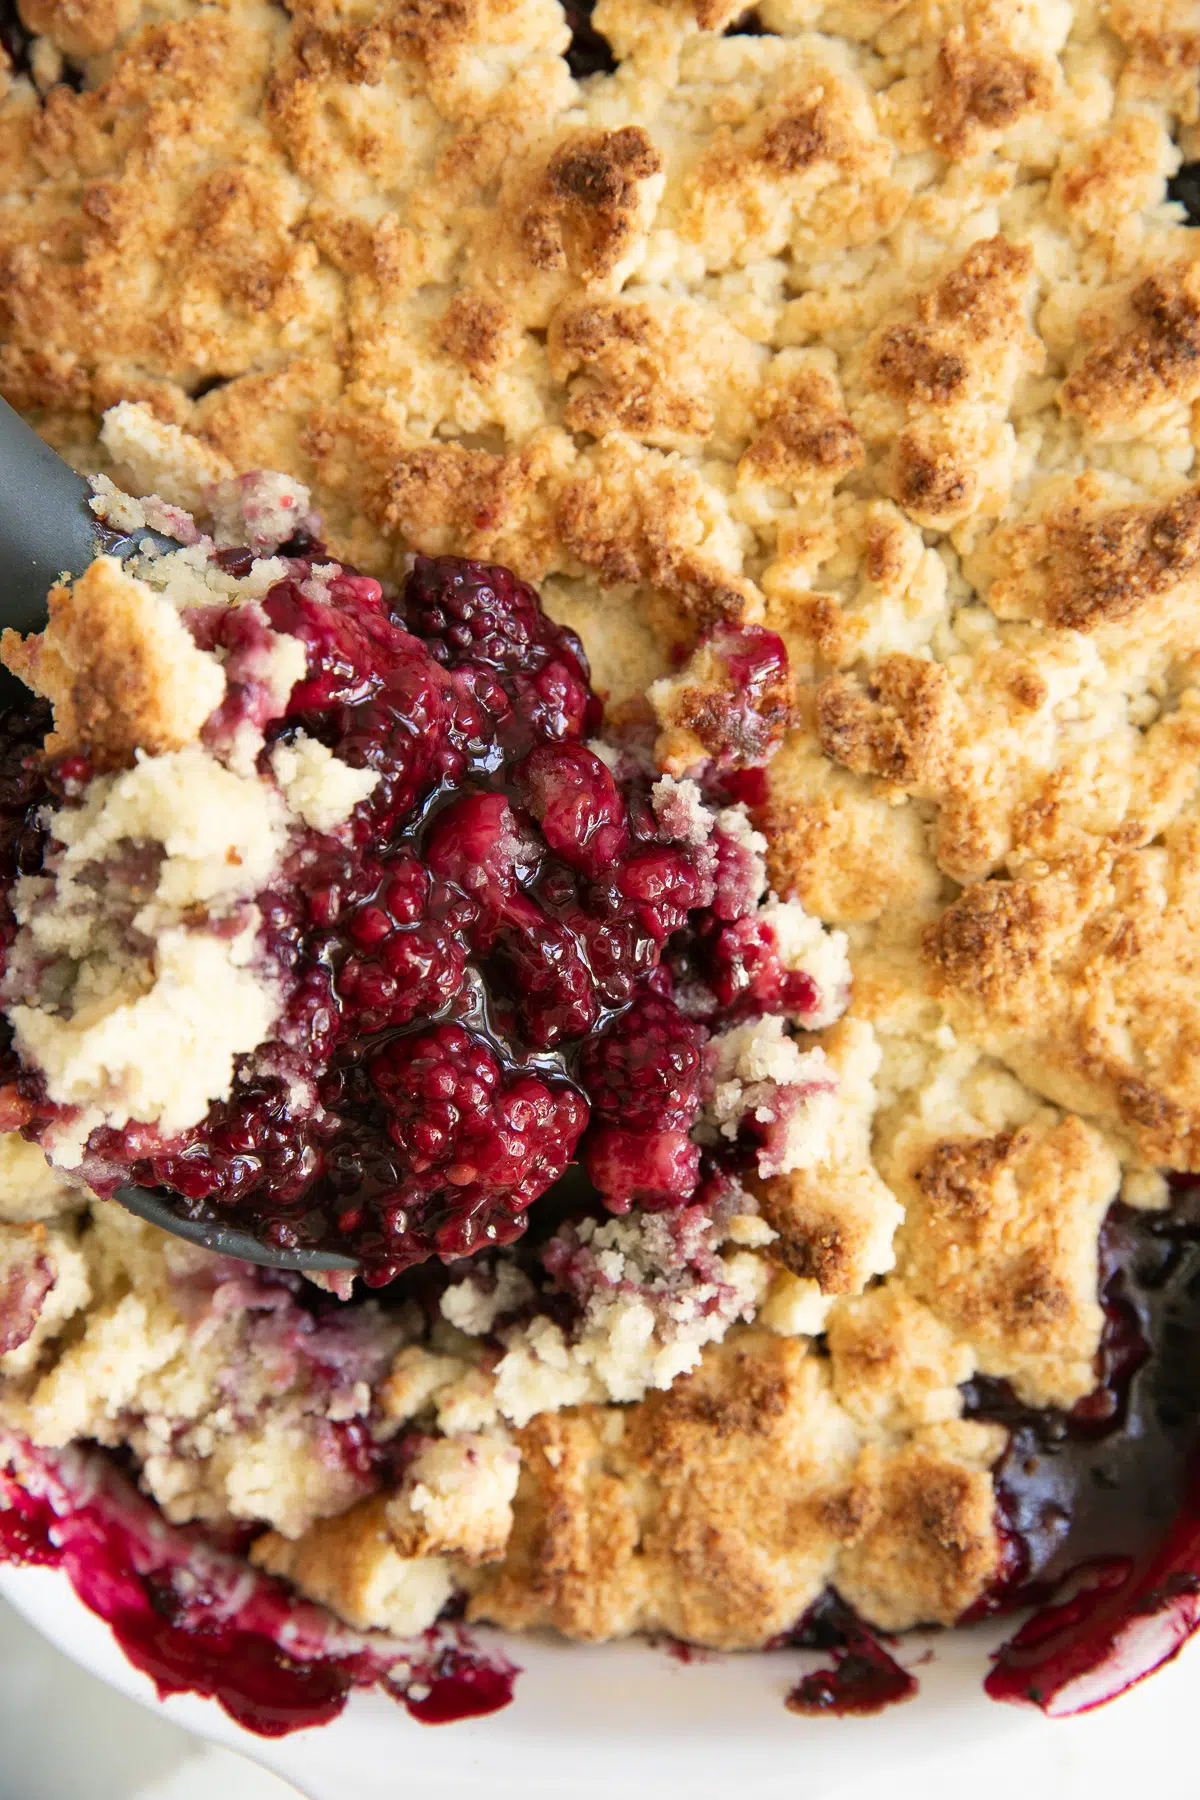 Close up of a rubber spatula digging into a blackberry cobbler.